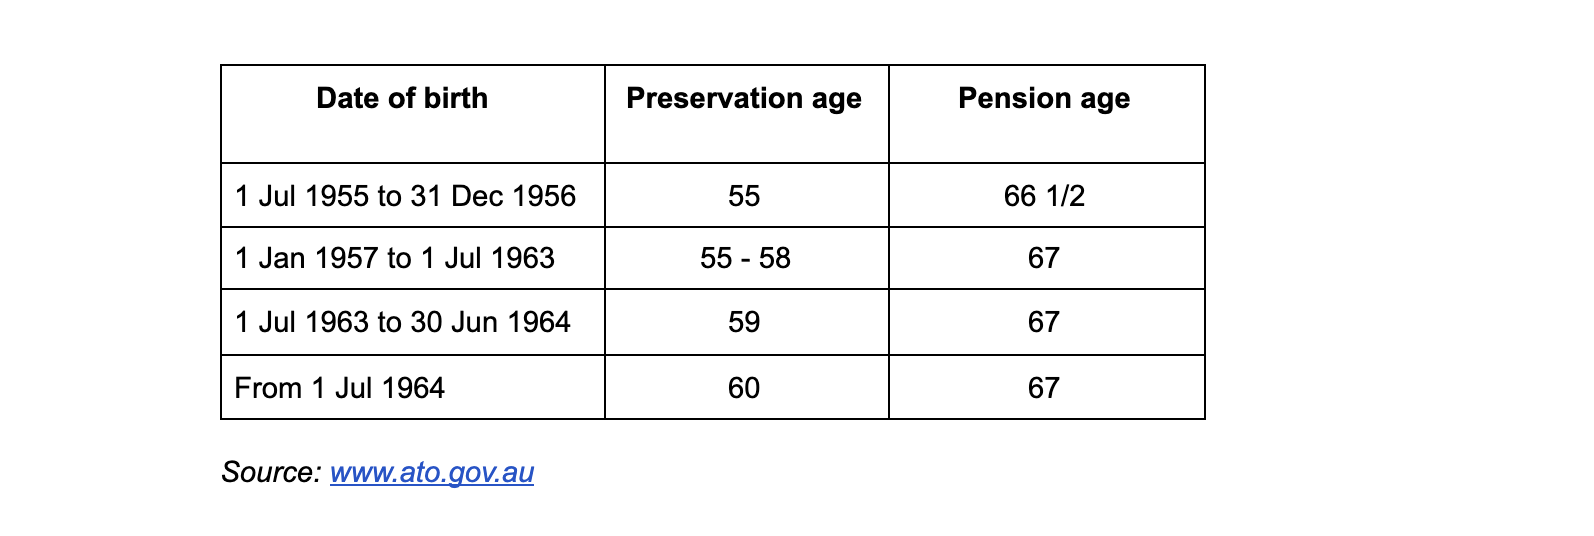 Preservation age chart